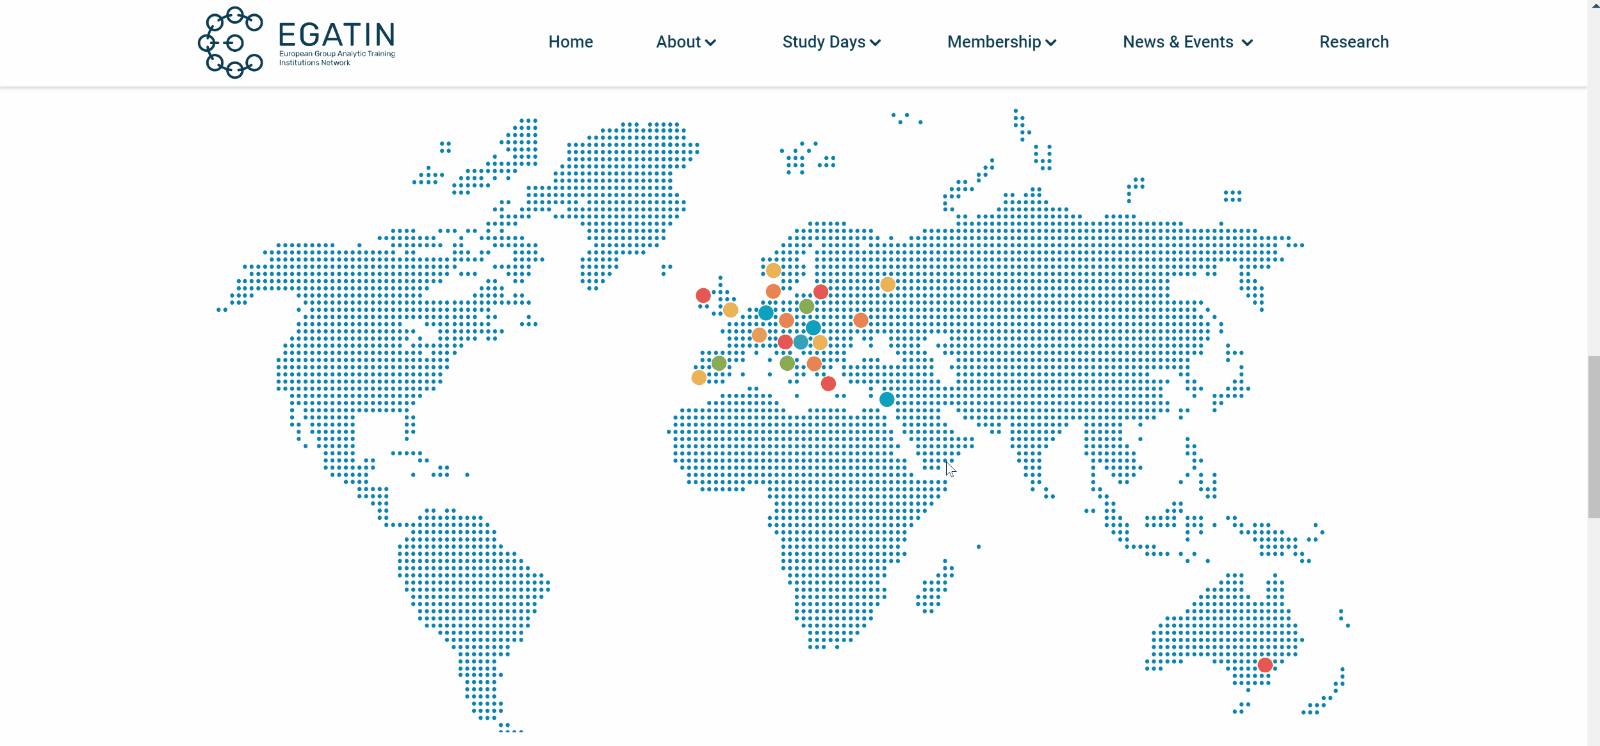 egatin visual identity and website design - dotted map with members marked on it